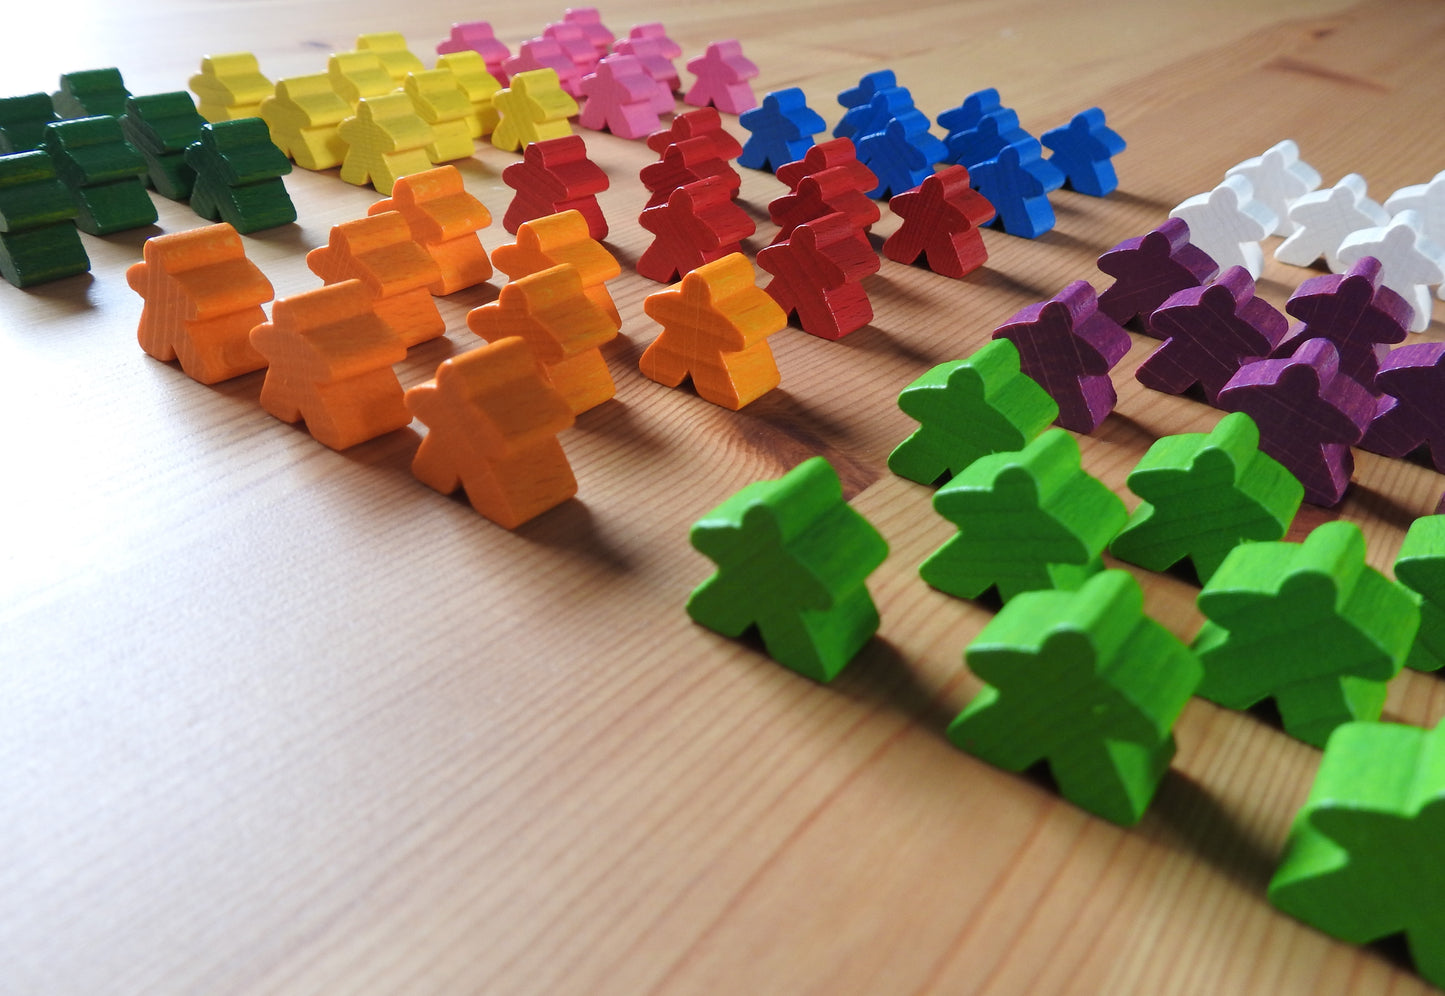 Another view of the sets lined up together - they look like a marching meeple army!